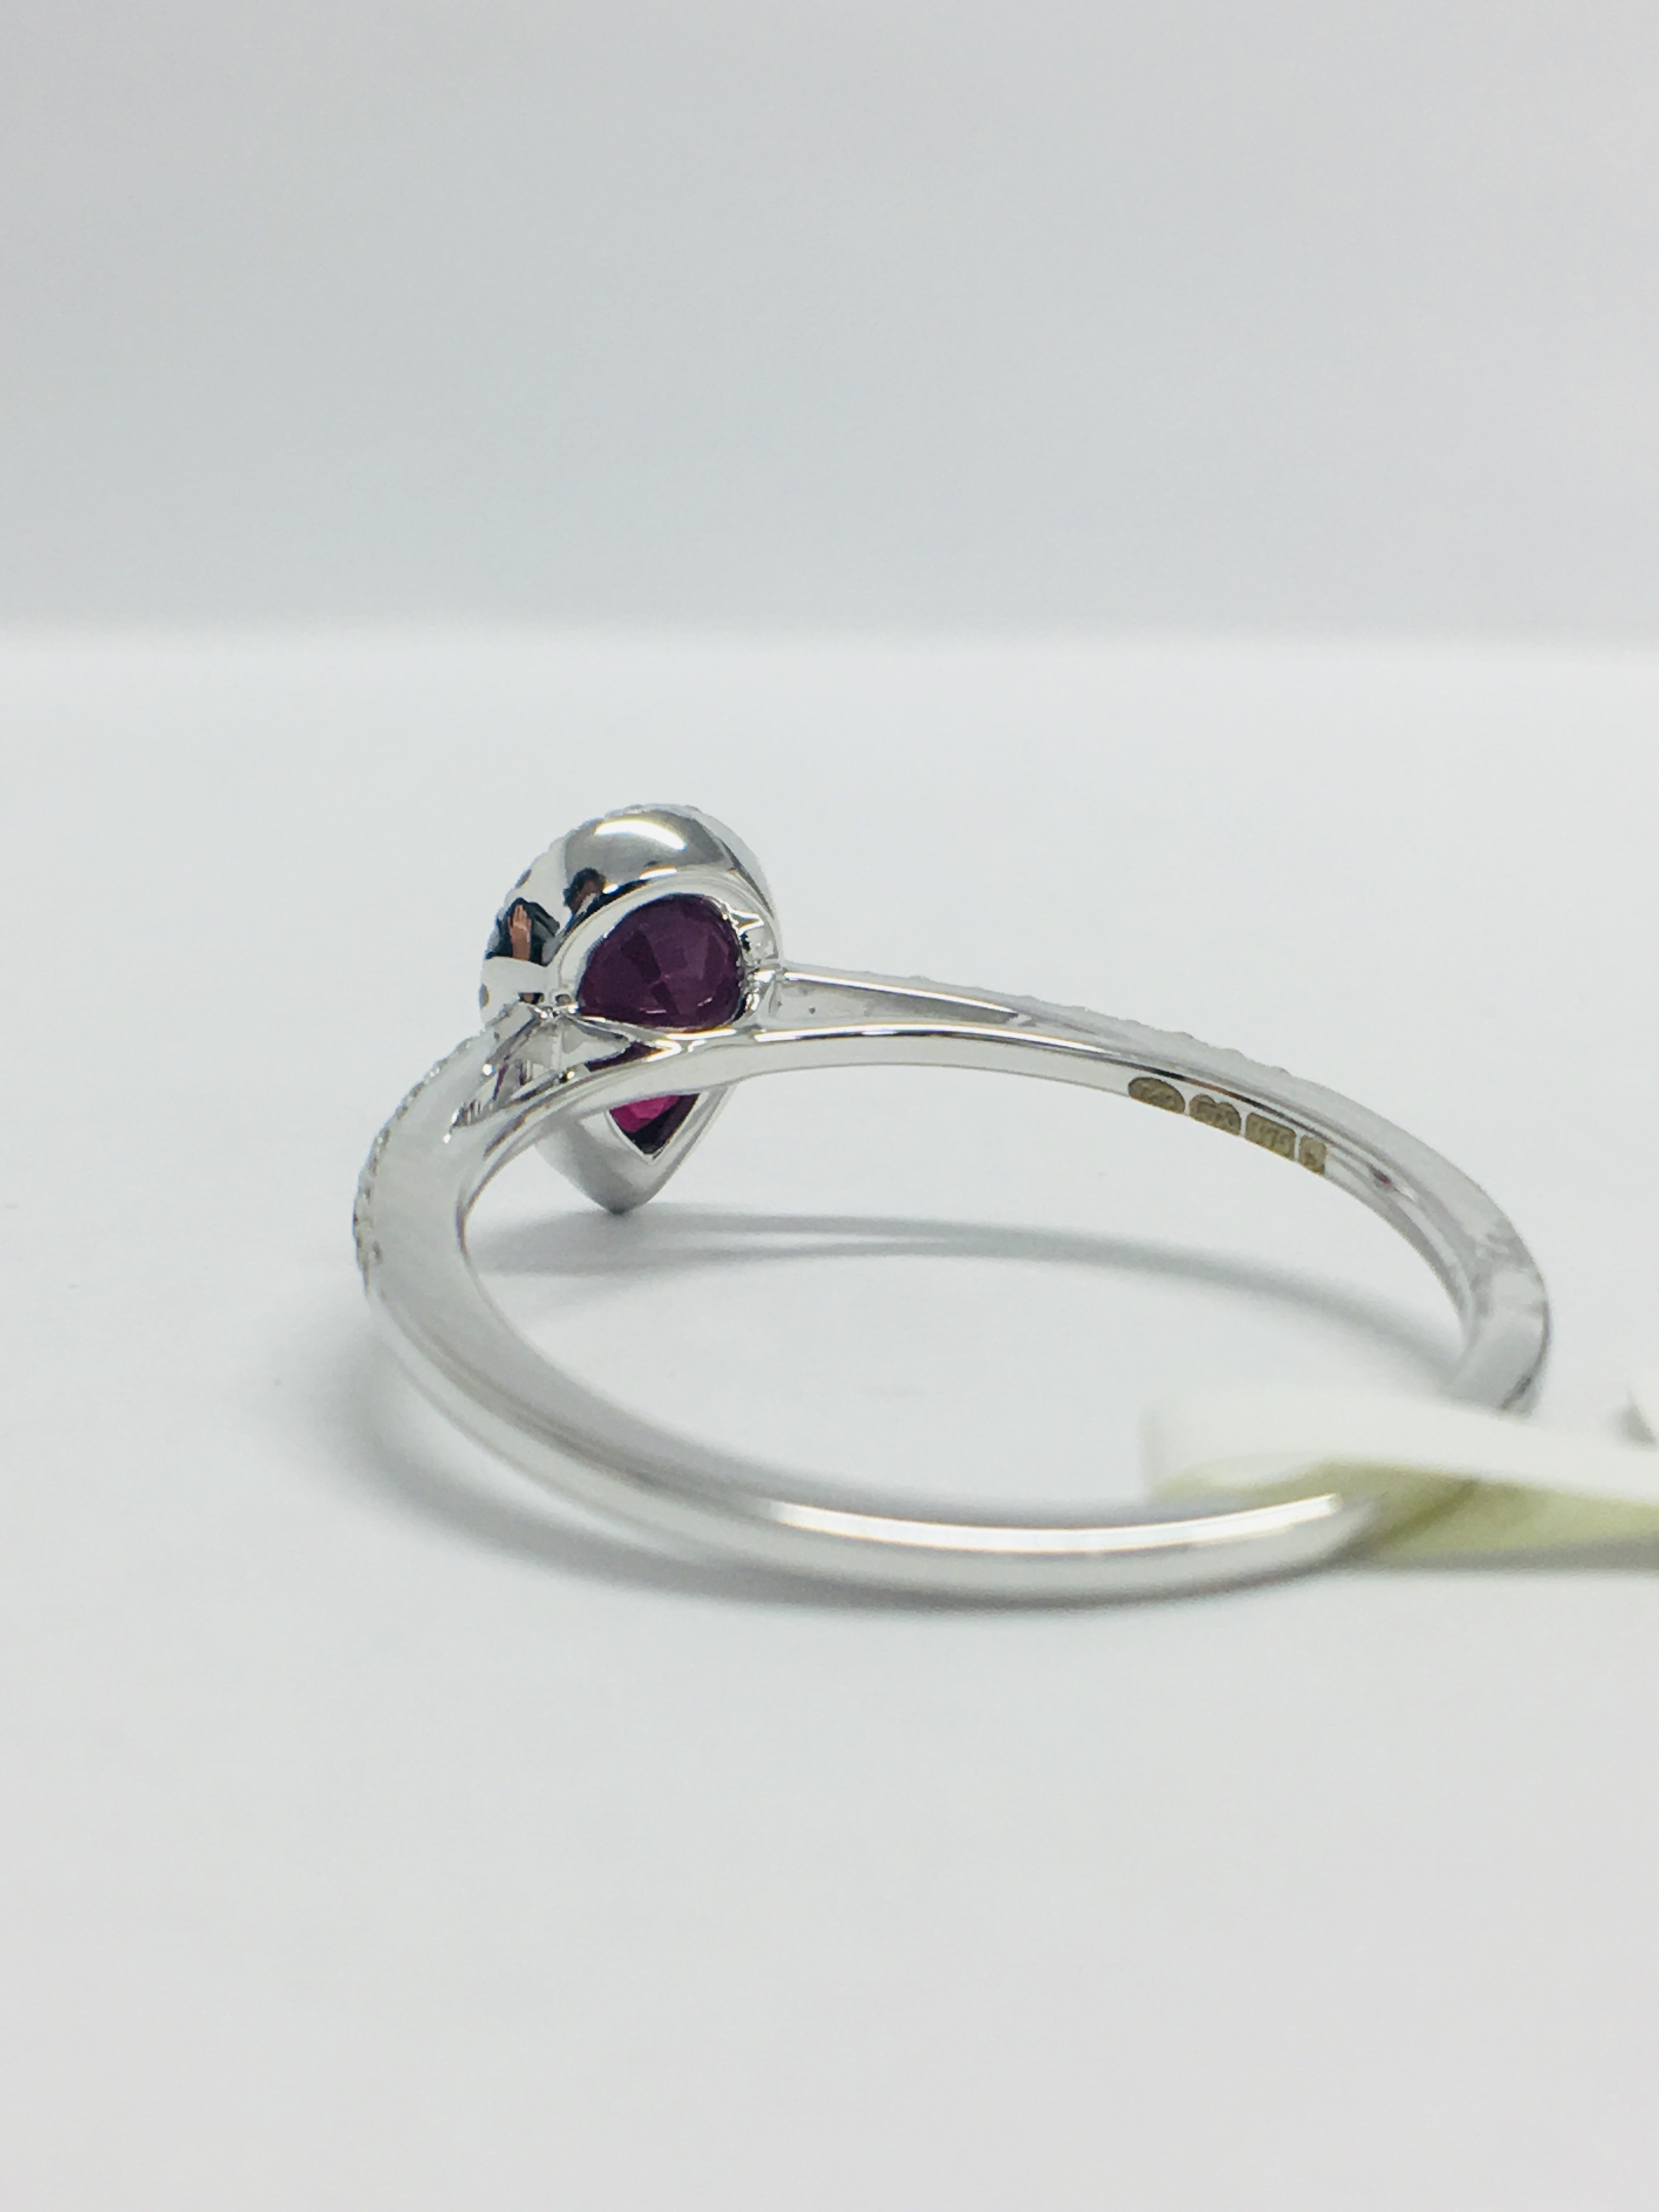 9Ct White Pearshape Ruby Diamond Ring, - Image 5 of 11